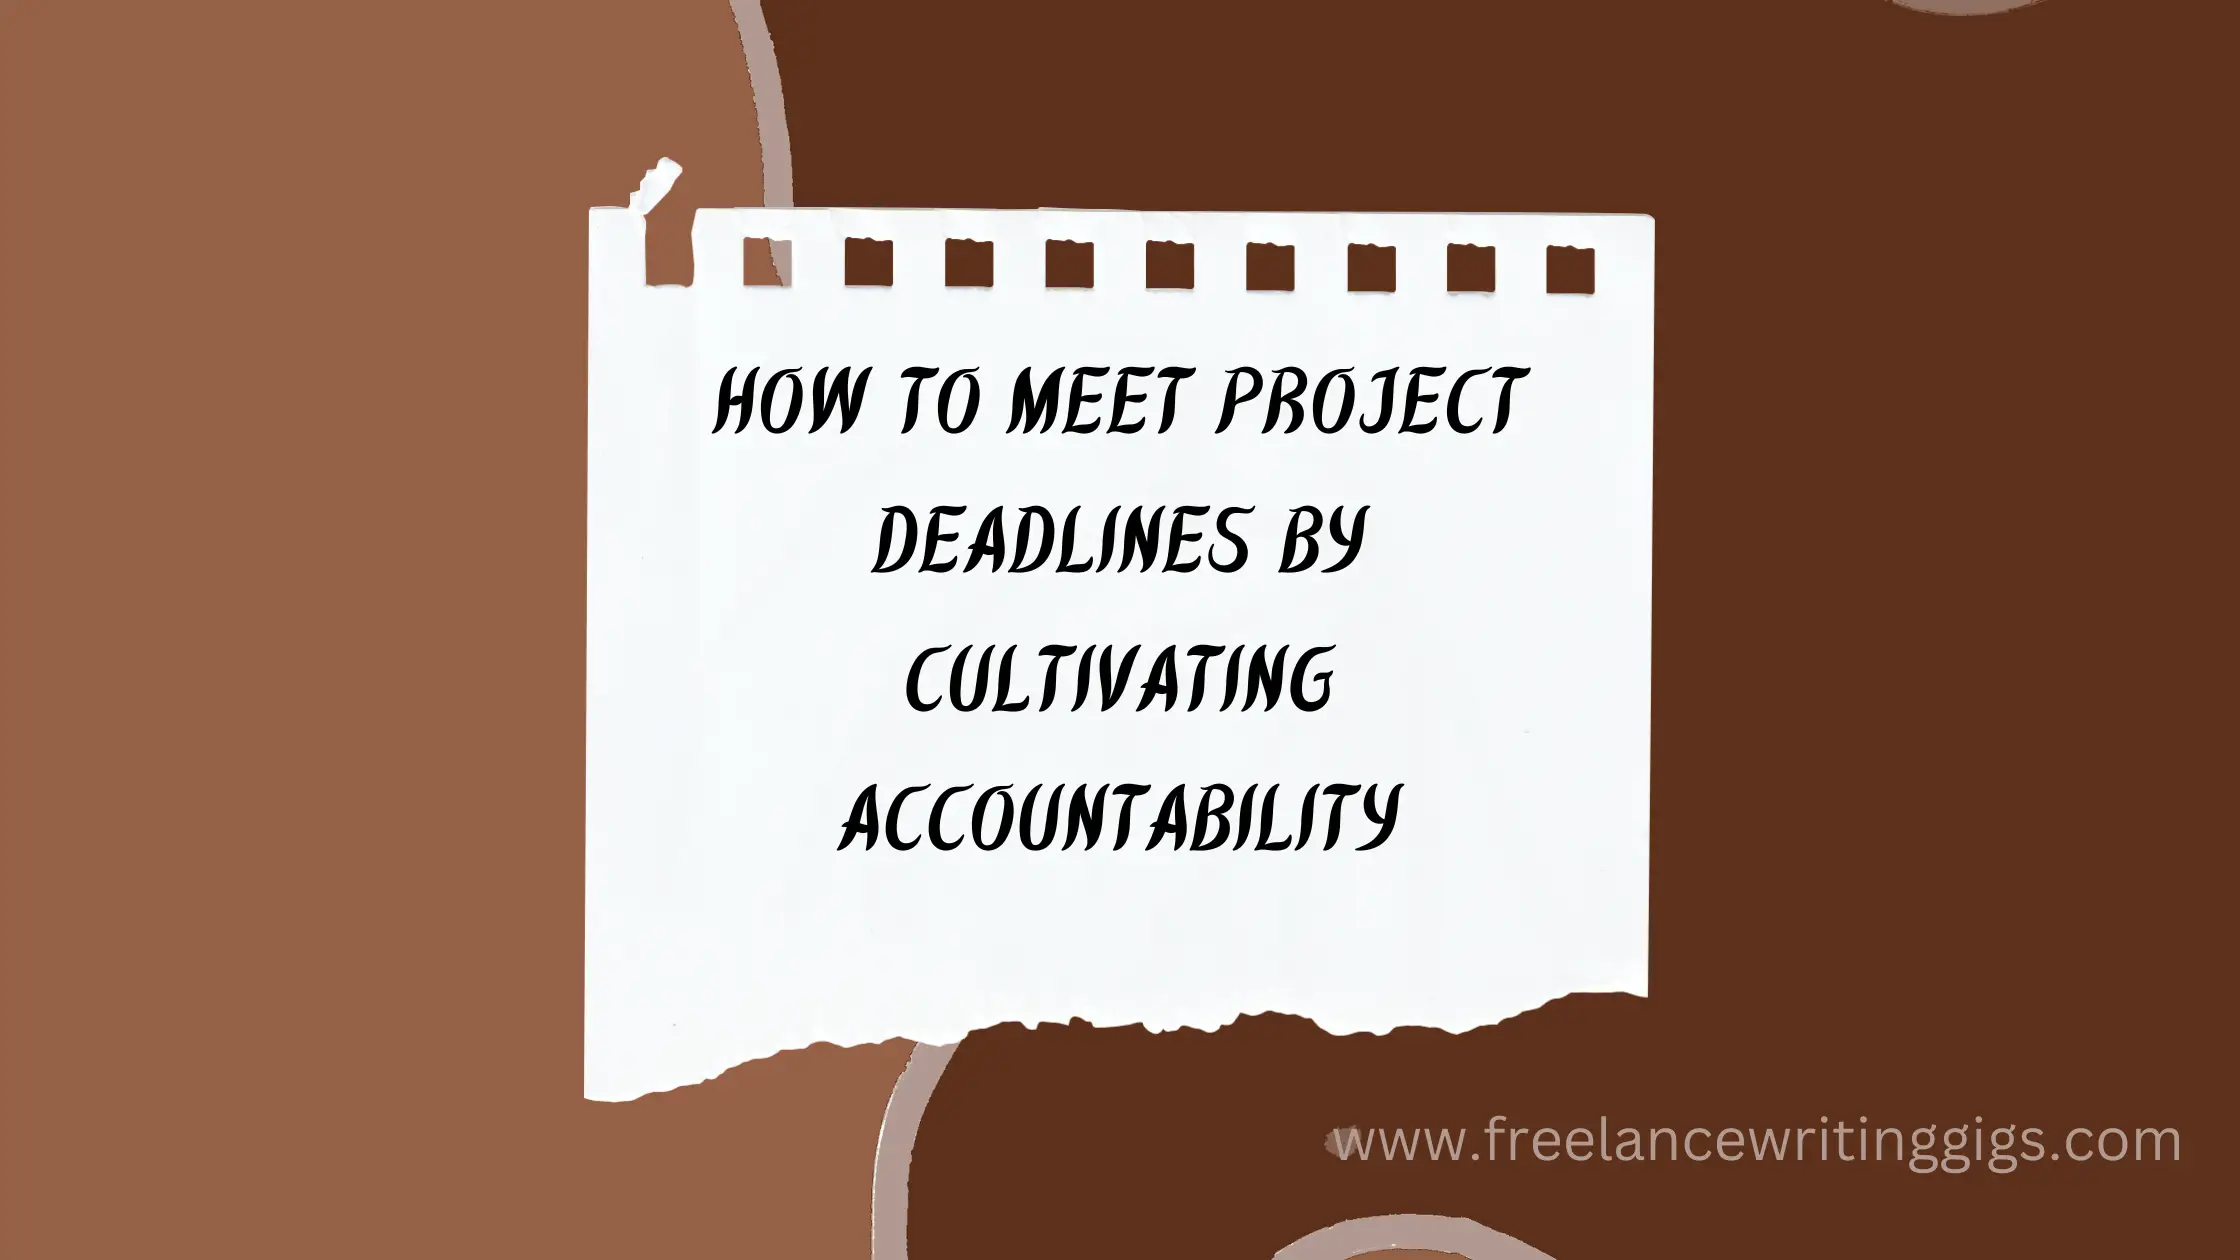 How To Meet Project Deadlines by Cultivating Accountability